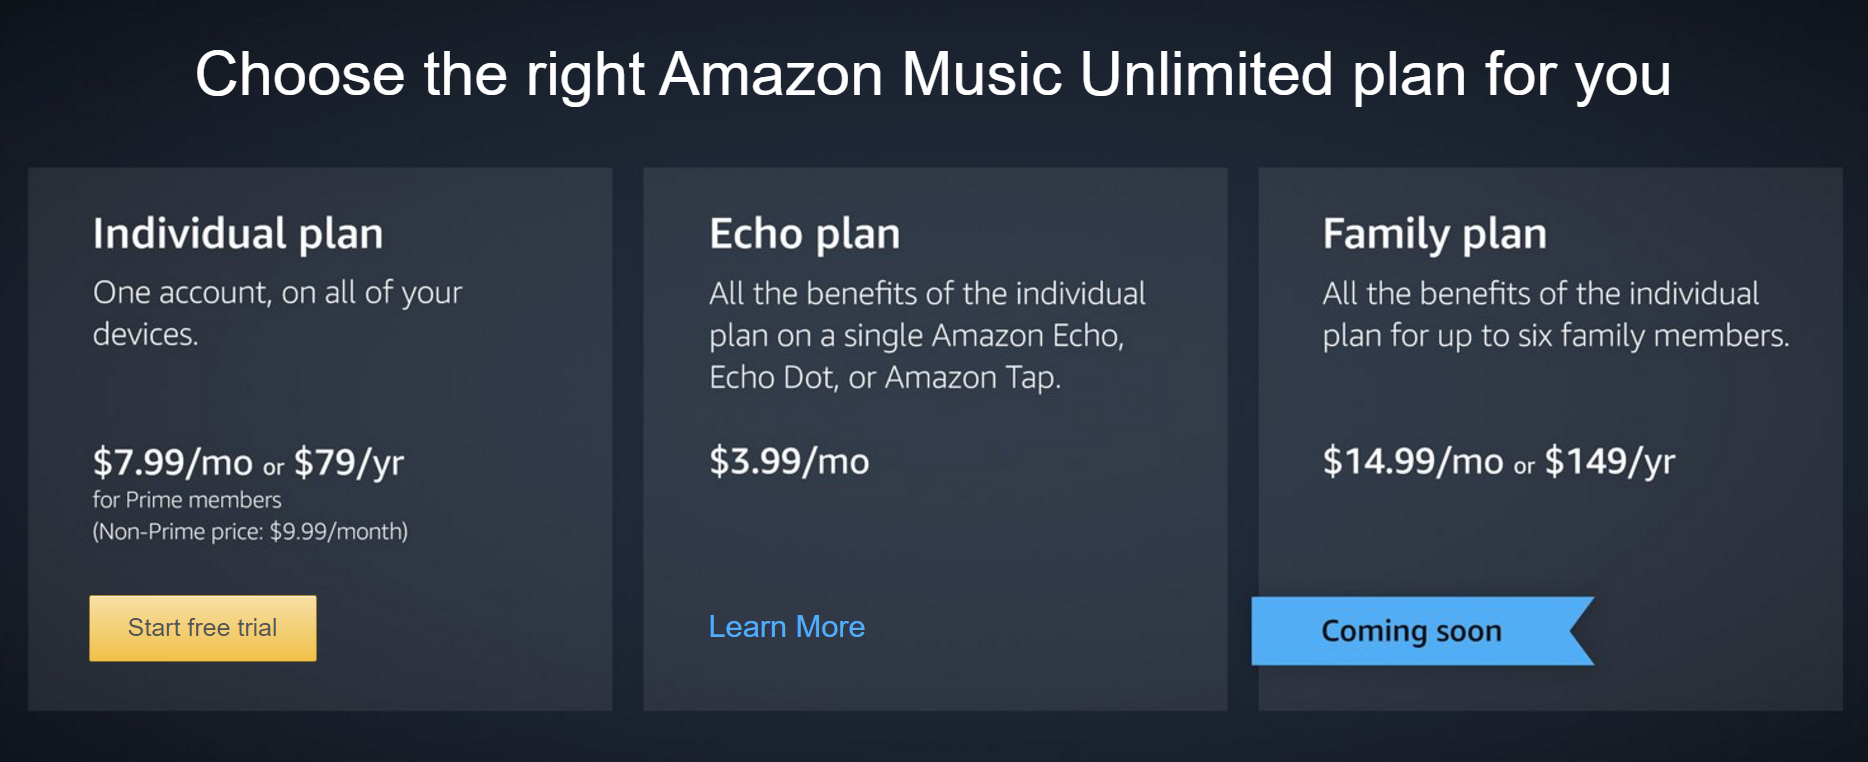 how to cancel amazon unlimited music